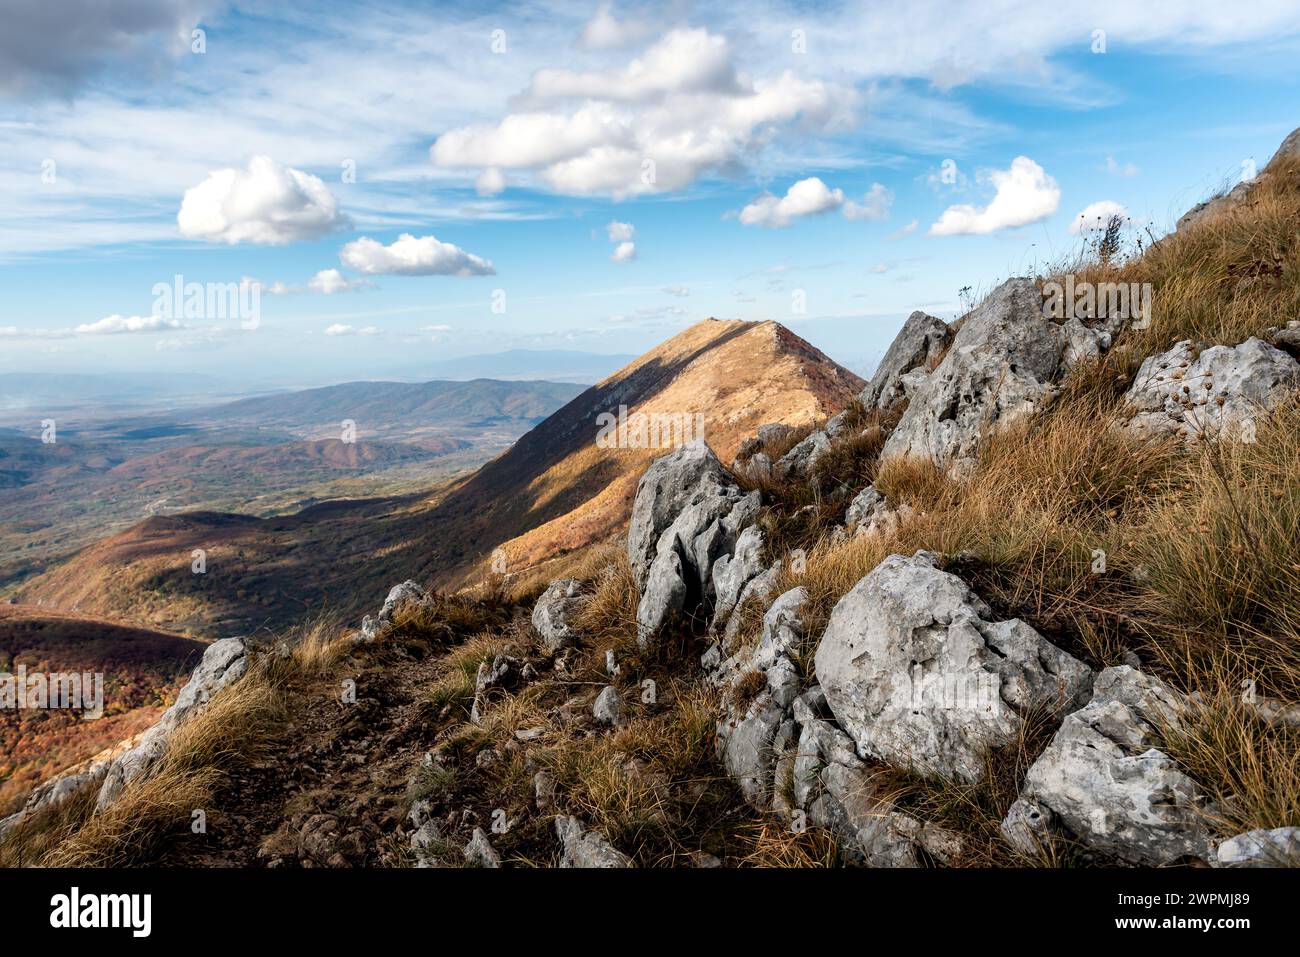 Mountain ranges on a sunny day. Scenic view of Dry Mountain (Suva Planina), Serbia Stock Photo